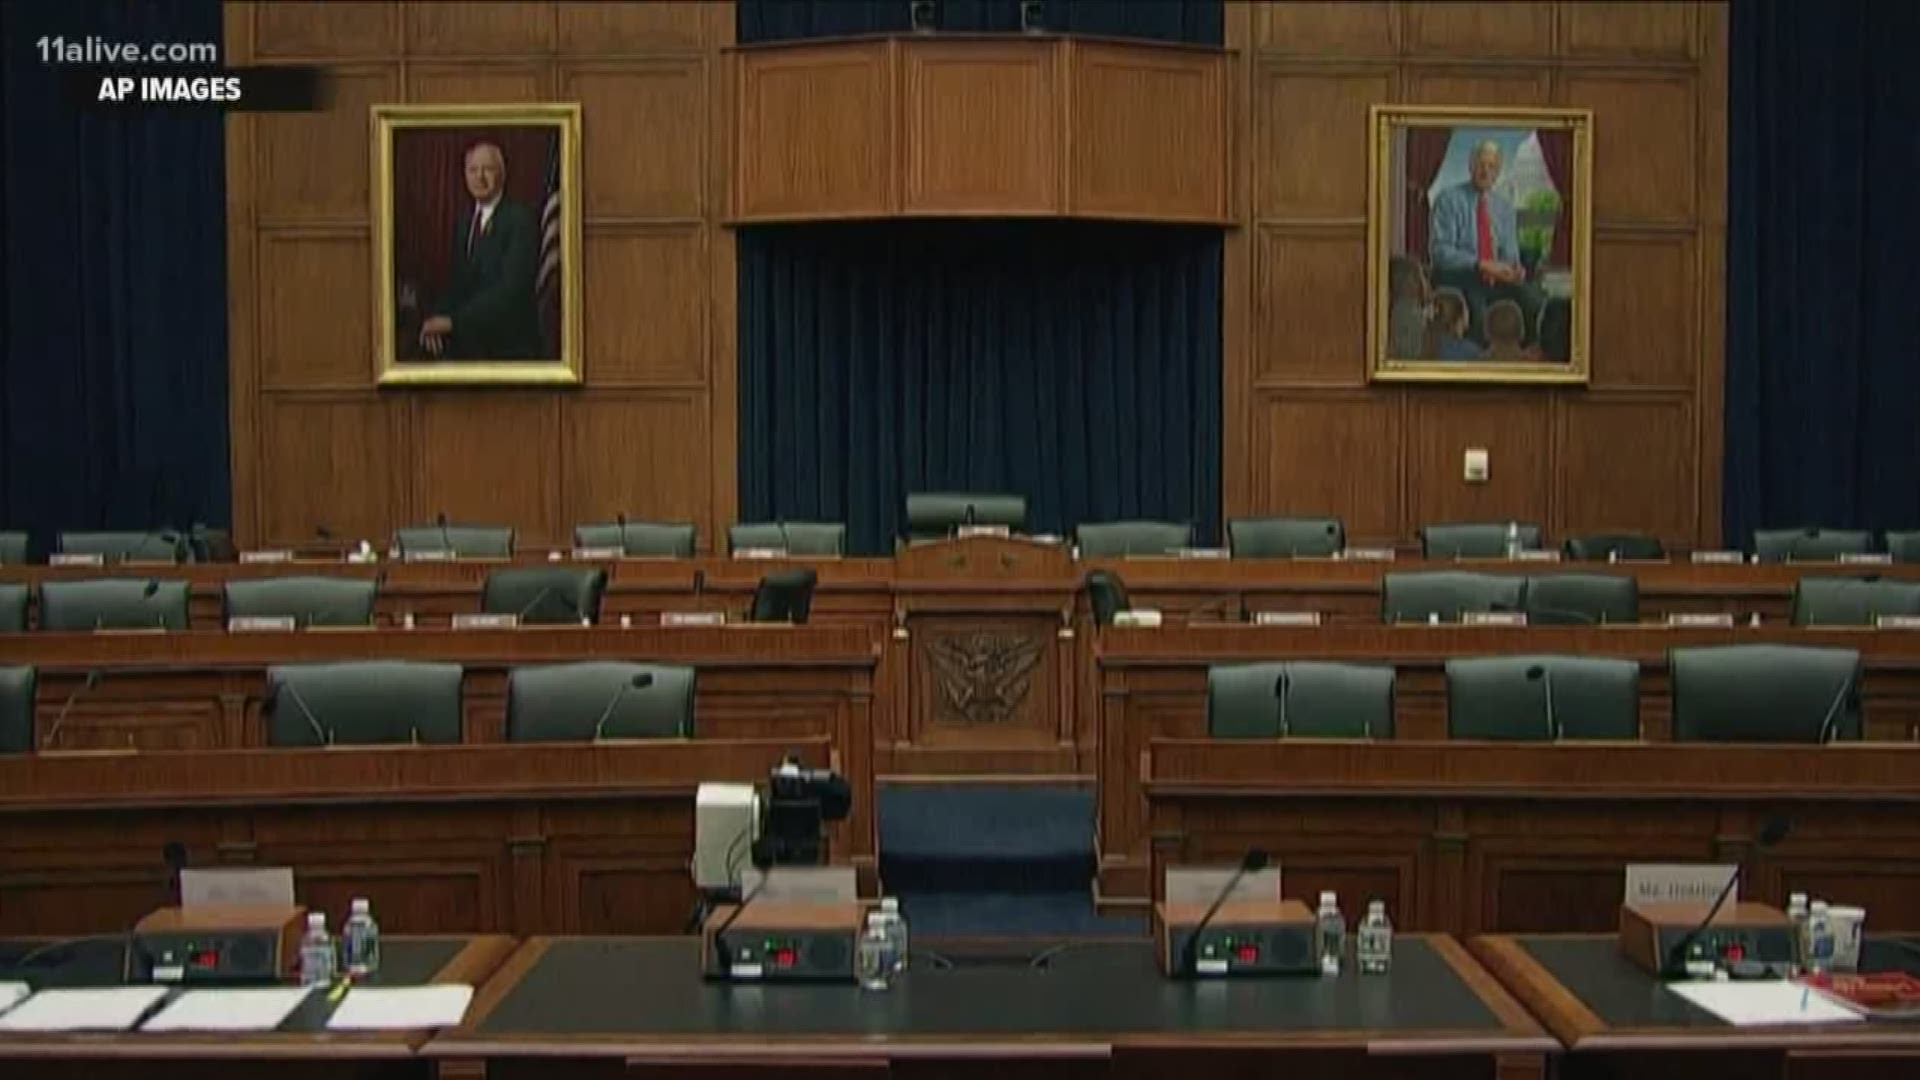 Testimony begins on Wednesday morning in House impeachment hearings.